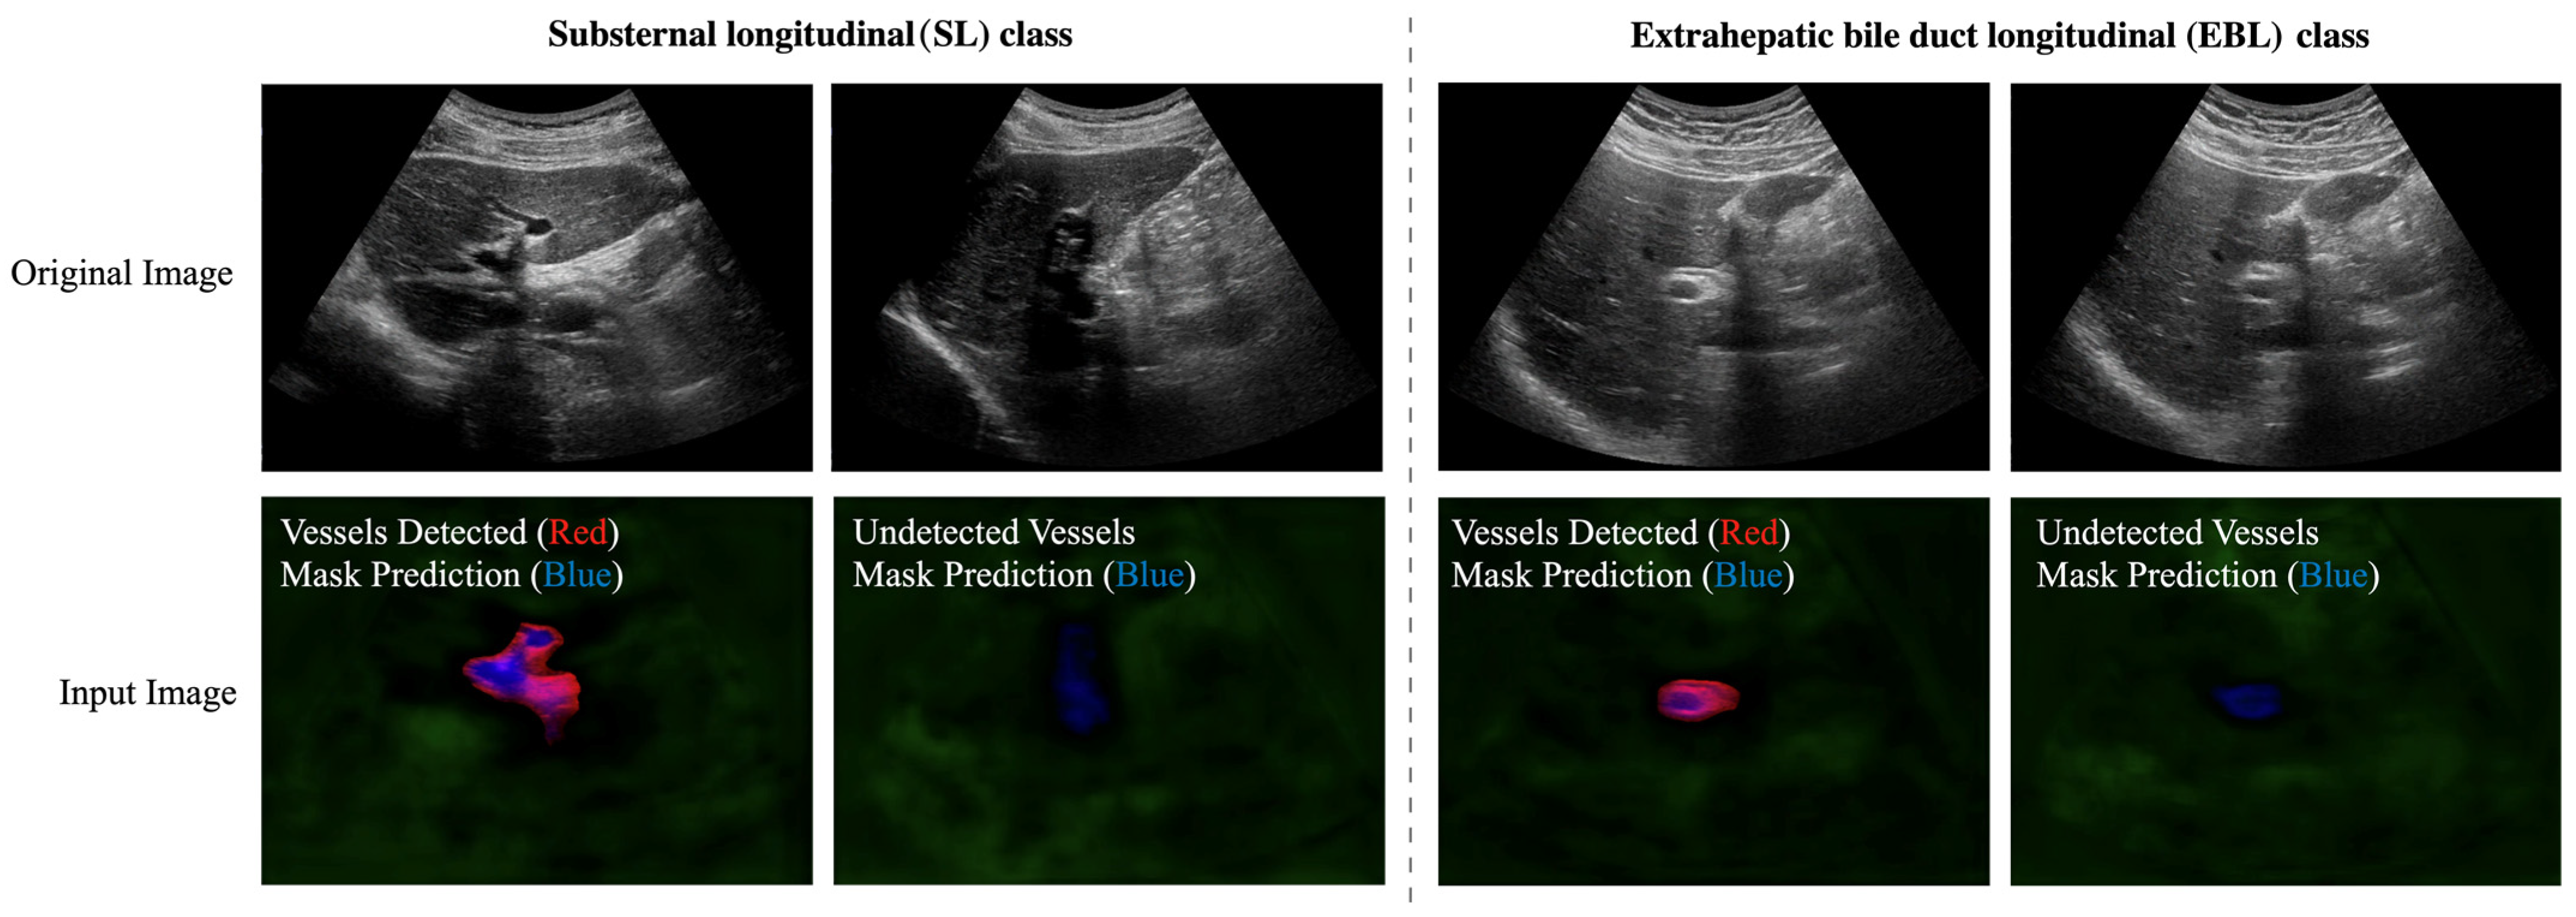 Real-time Burn Classification using Ultrasound Imaging